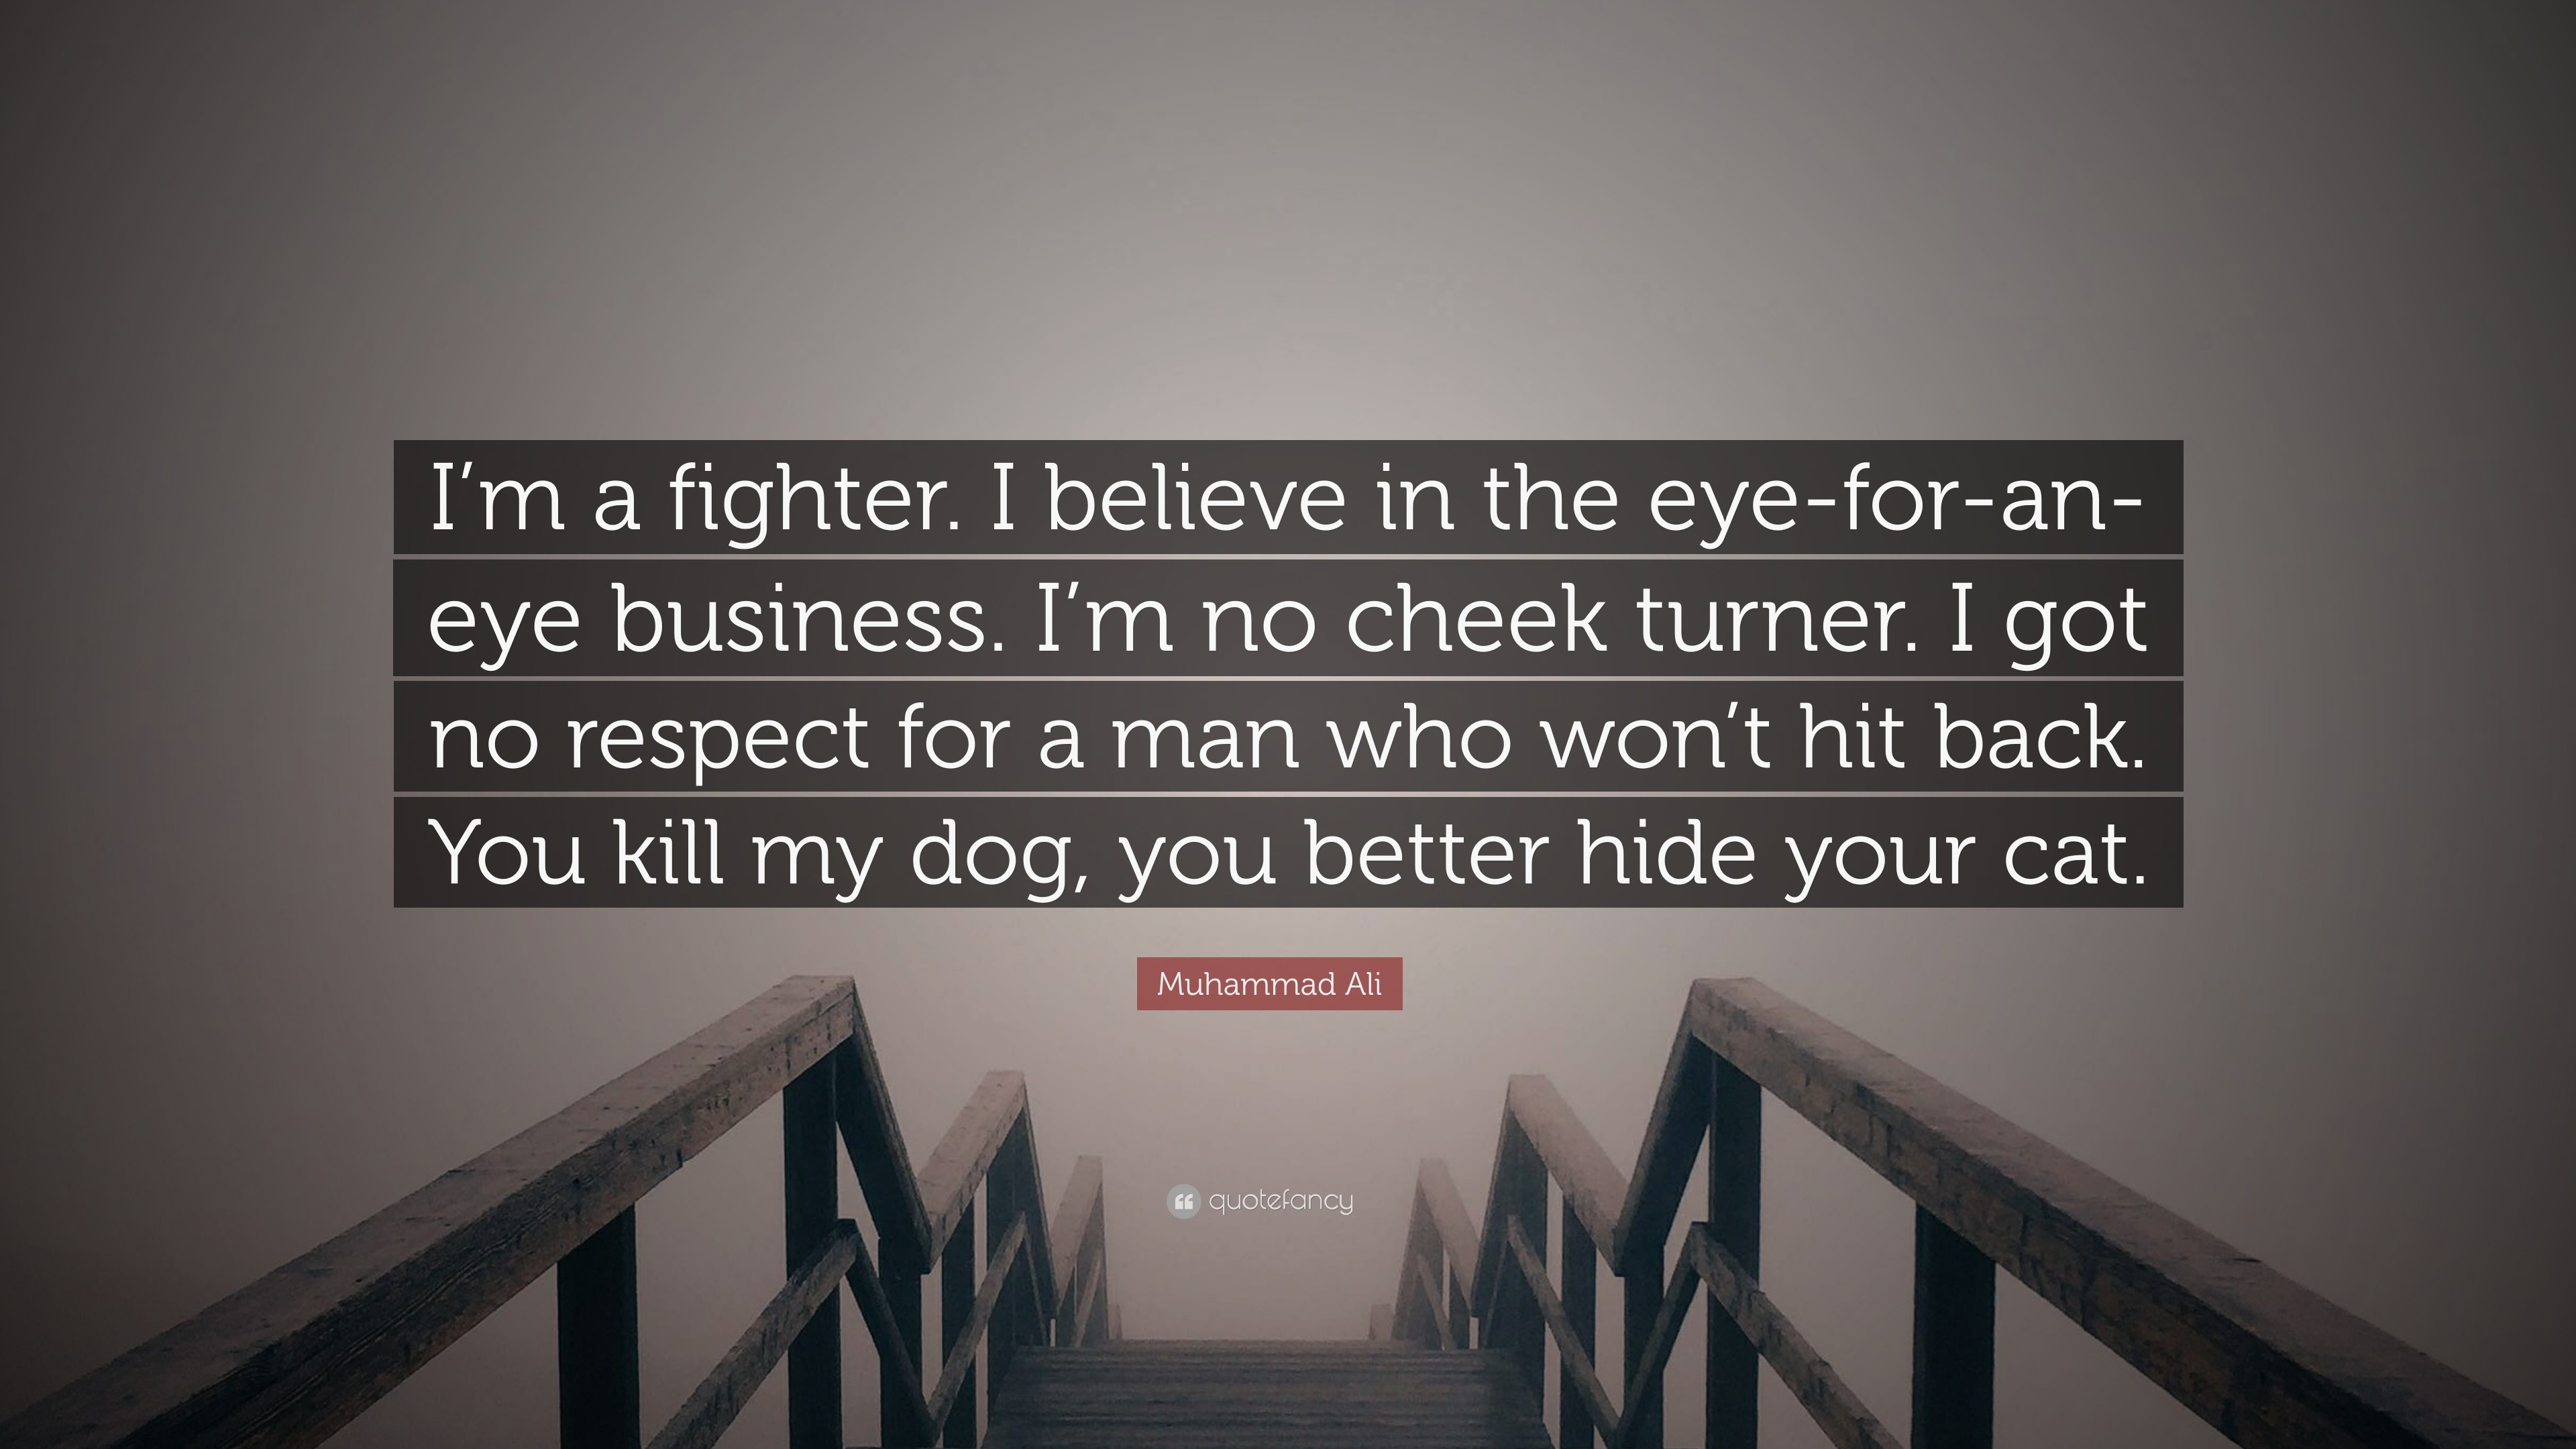 3840x2160 Muhammad Ali Quote: “I'm a fighter. I believe in the eye